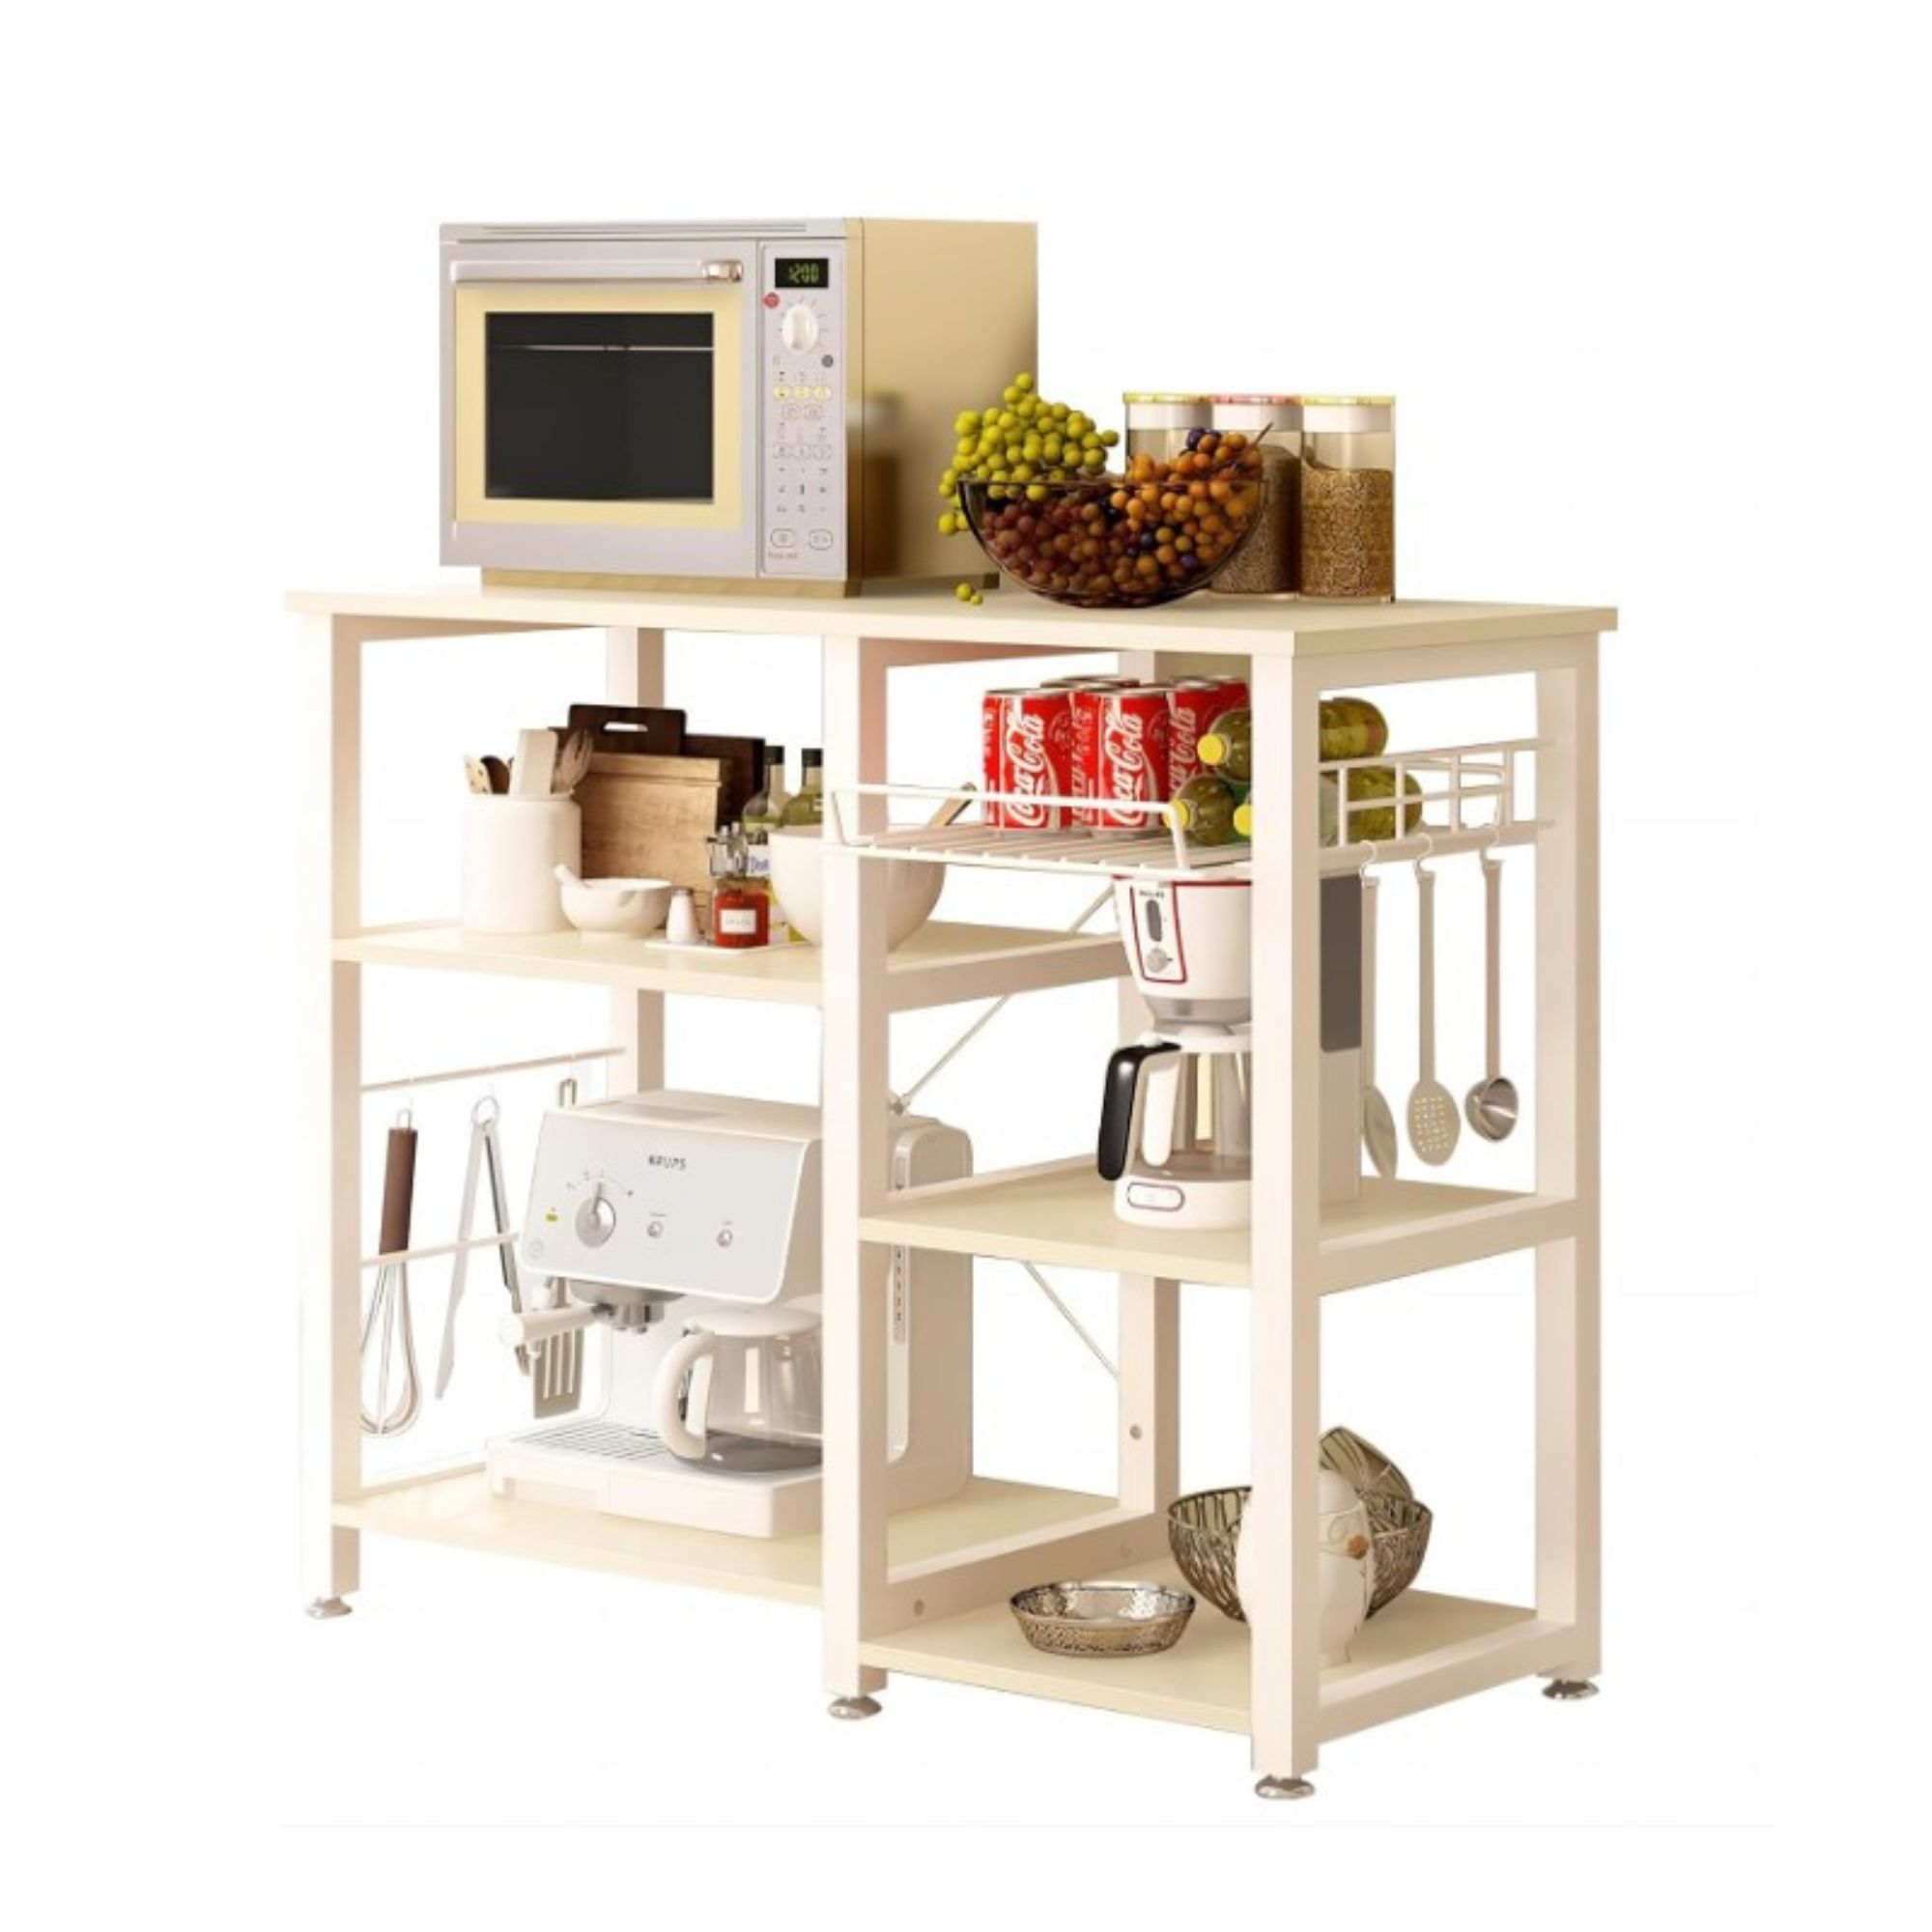 A white kitchen island with a microwave on top of it and cookware and dinnerware on its shelves